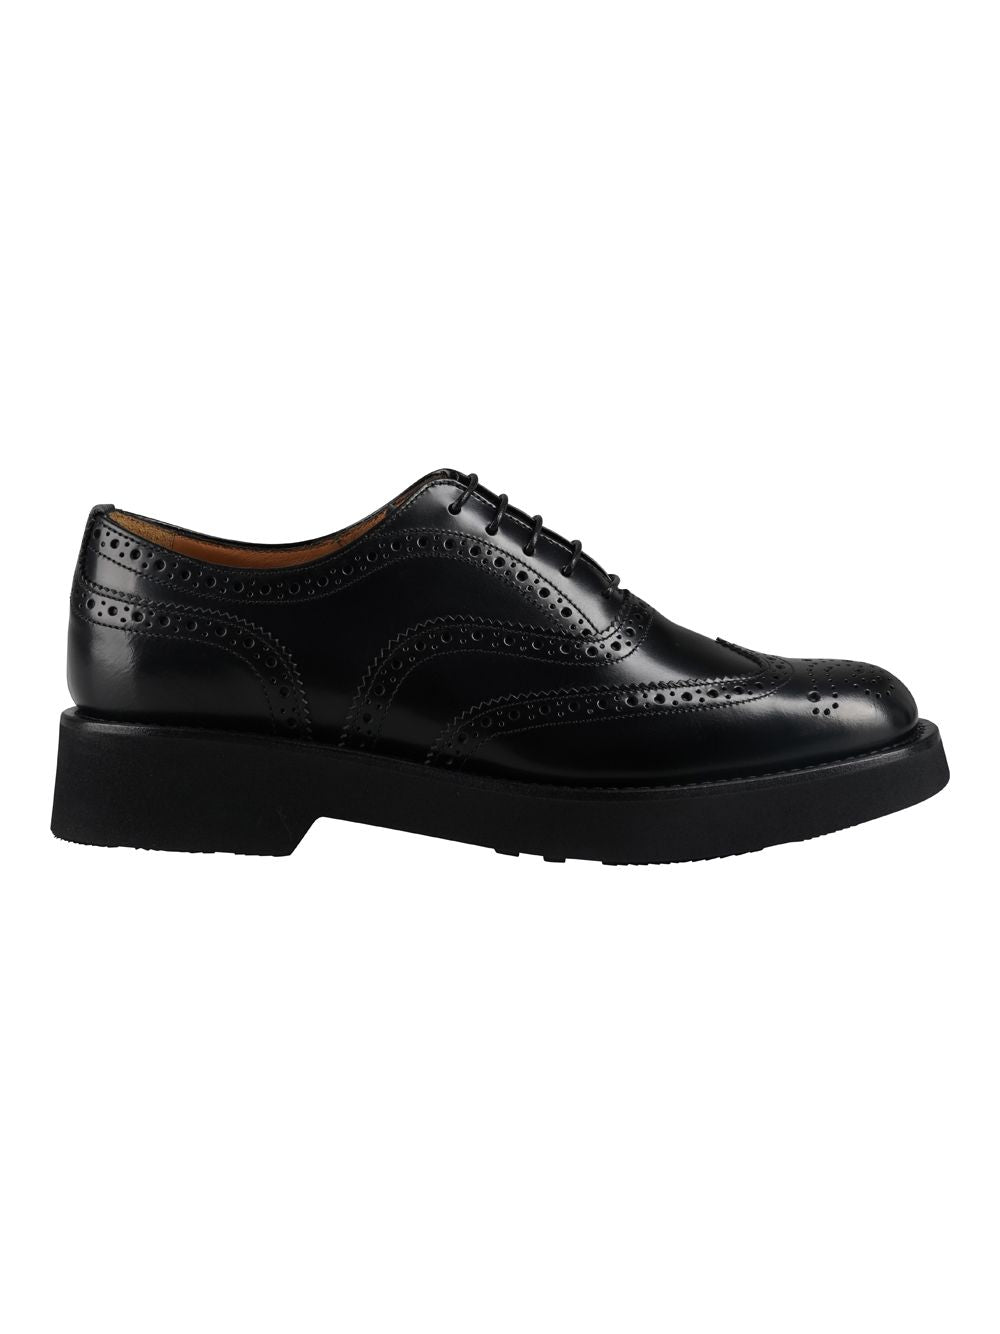 CHURCH'S Perforated Leather Oxford Shoes for Women